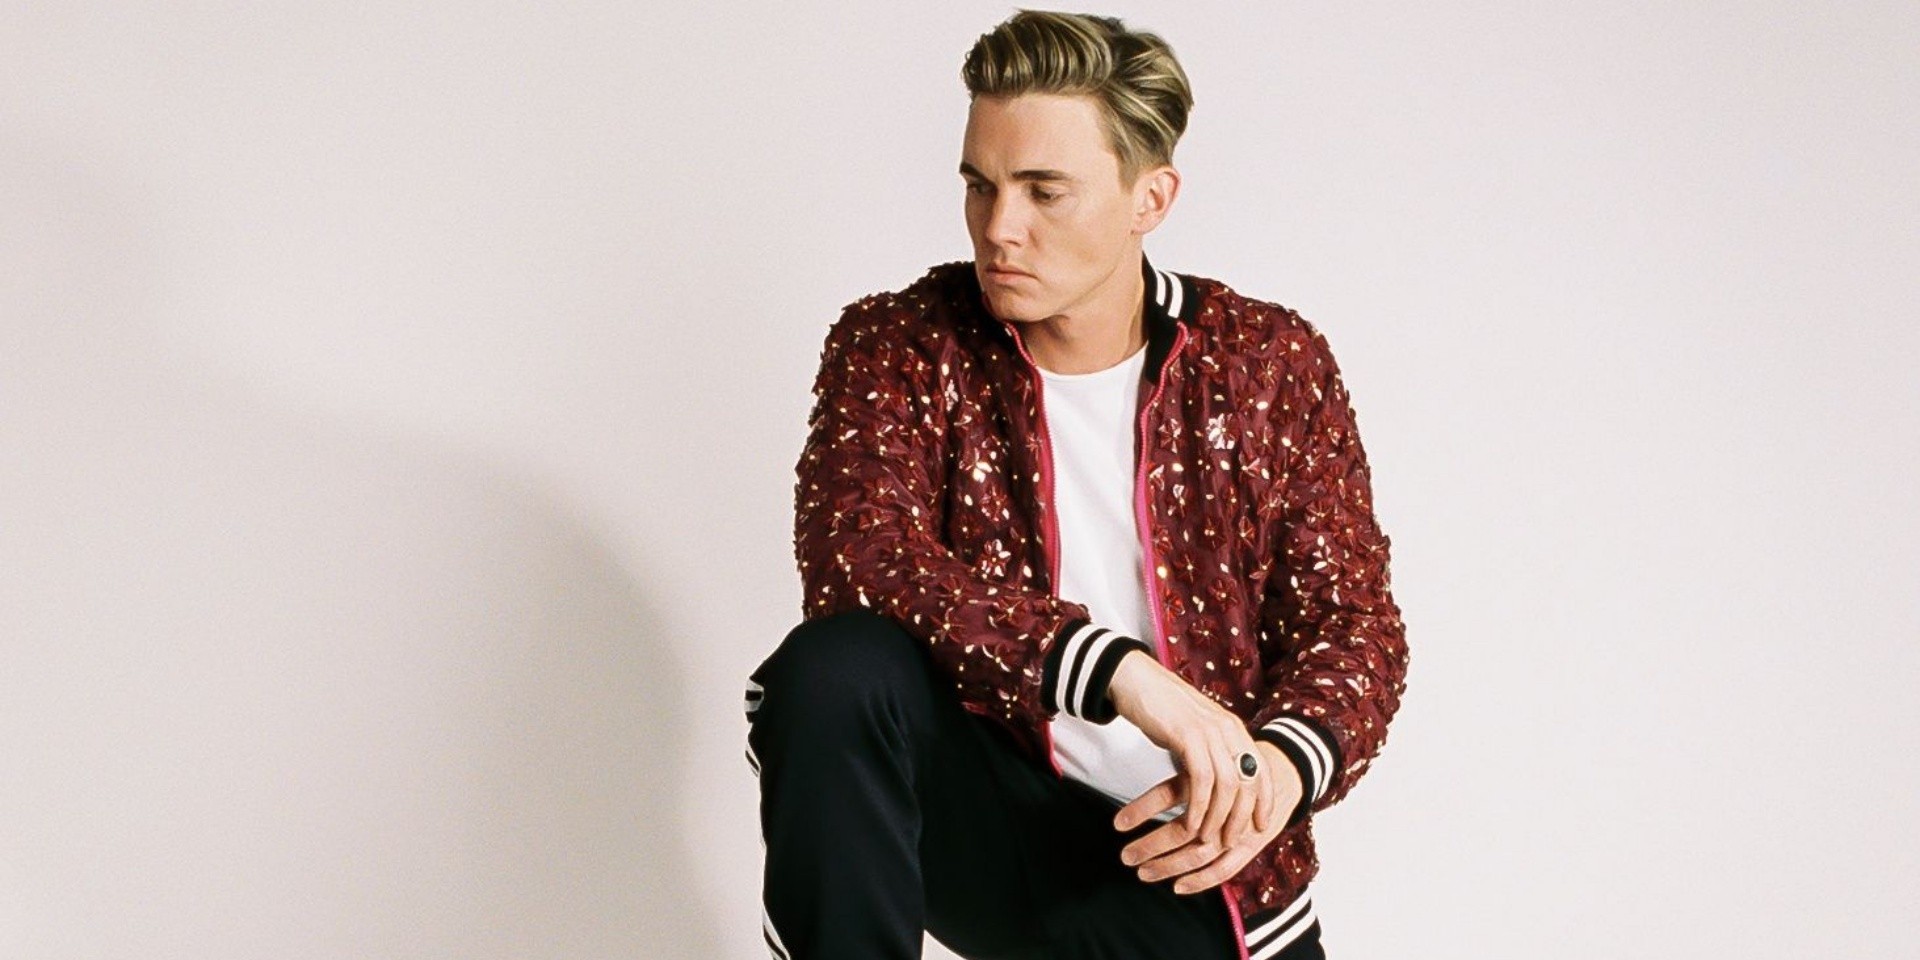 Jesse McCartney to make his debut in Singapore in July